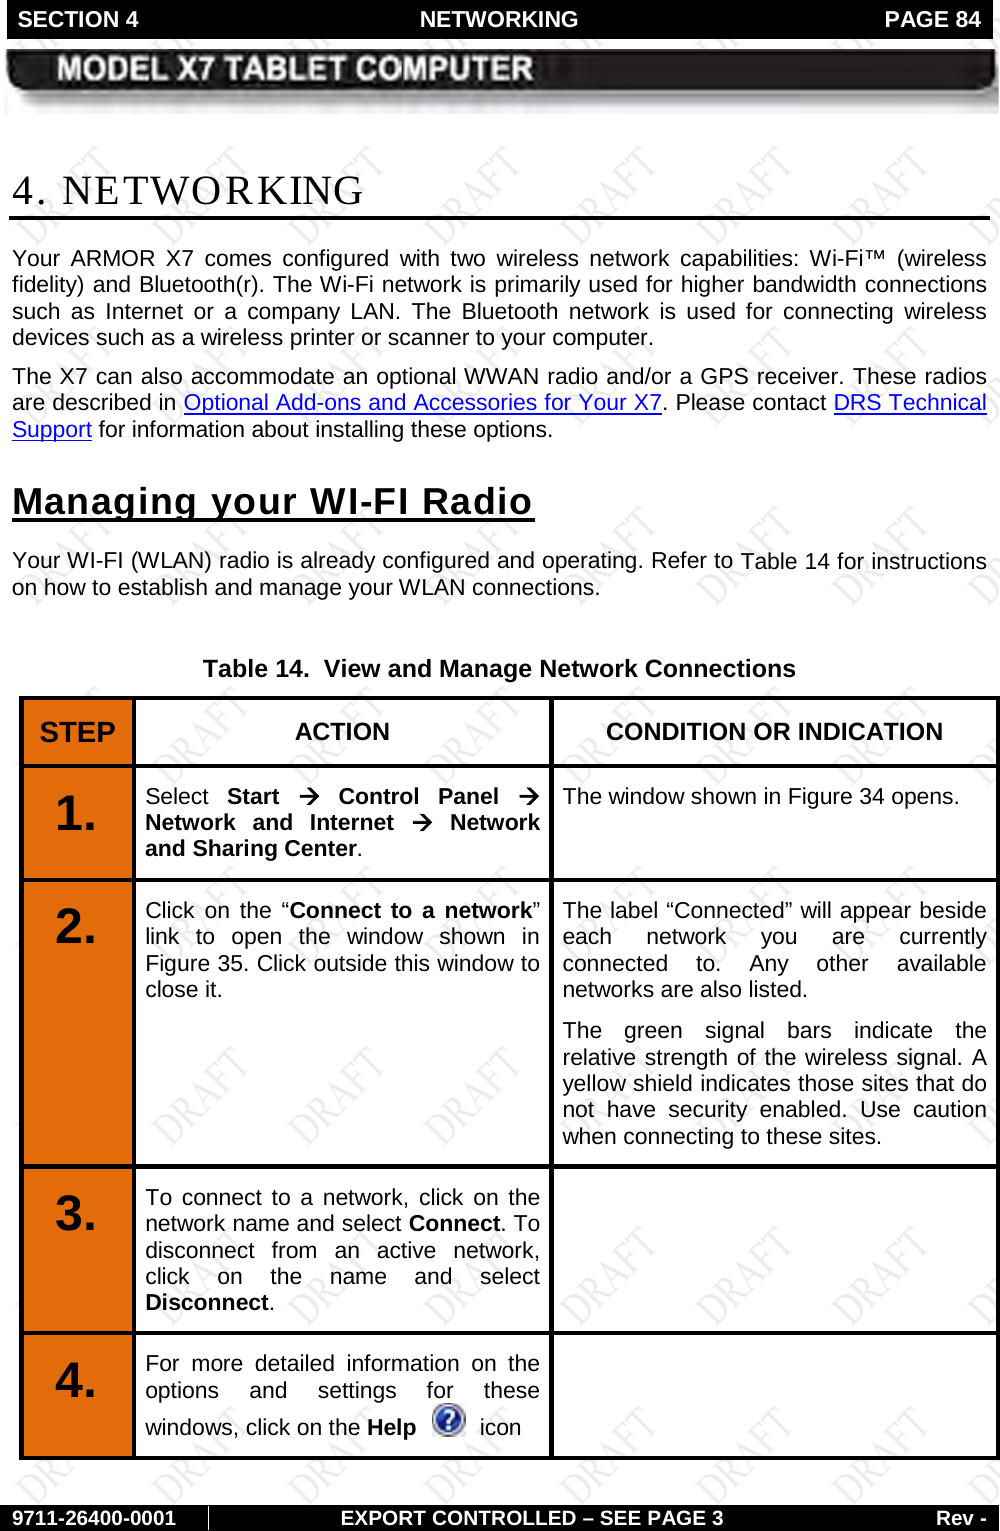 SECTION 4 NETWORKING  PAGE 84        9711-26400-0001 EXPORT CONTROLLED – SEE PAGE 3 Rev - 4. NETWORKING Your ARMOR X7  comes  configured  with two wireless network capabilities: Wi-Fi™ (wireless fidelity) and Bluetooth(r). The Wi-Fi network is primarily used for higher bandwidth connections such as Internet or a company LAN.  The Bluetooth network is used for connecting wireless devices such as a wireless printer or scanner to your computer. The X7 can also accommodate an optional WWAN radio and/or a GPS receiver. These radios  are described in Optional Add-ons and Accessories for Your X7. Please contact DRS Technical Support for information about installing these options. Your WI-FI (WLAN) radio is already configured and operating. Refer to Managing your WI-FI Radio Table 14 for instructions on how to establish and manage your WLAN connections.  Table 14.  View and Manage Network Connections STEP  ACTION CONDITION OR INDICATION 1.   Select Start à Control Panel à Network and Internet à Network and Sharing Center.  The window shown in Figure 34 opens.  2.   Click on the “Connect to a network” link to open the window shown in Figure 35. Click outside this window to close it. The label “Connected” will appear beside each network you are currently connected to. Any other available networks are also listed. The green signal bars indicate the relative strength of the wireless signal. A yellow shield indicates those sites that do not have security enabled. Use caution when connecting to these sites. 3.   To connect to a network, click on the network name and select Connect. To disconnect from an active network, click on the name and select Disconnect.  4.  For more detailed information on the options and settings for these windows, click on the Help    icon   